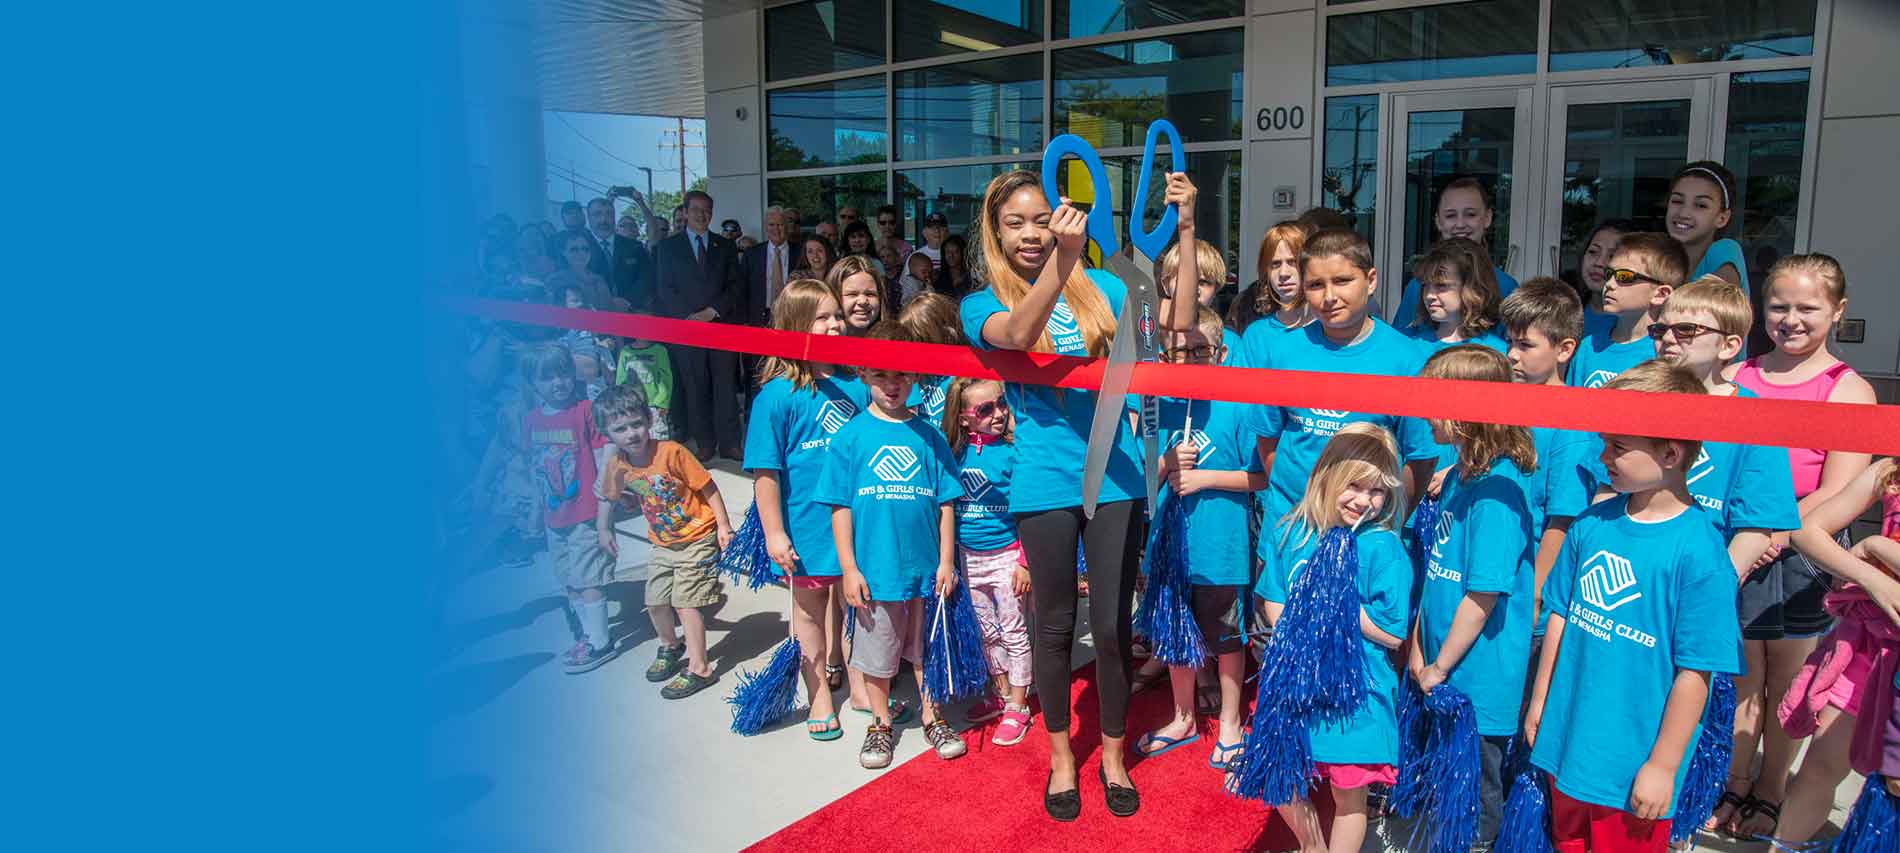 Ribbon cutting with group of kids at Boys and Girls Club of Menasha